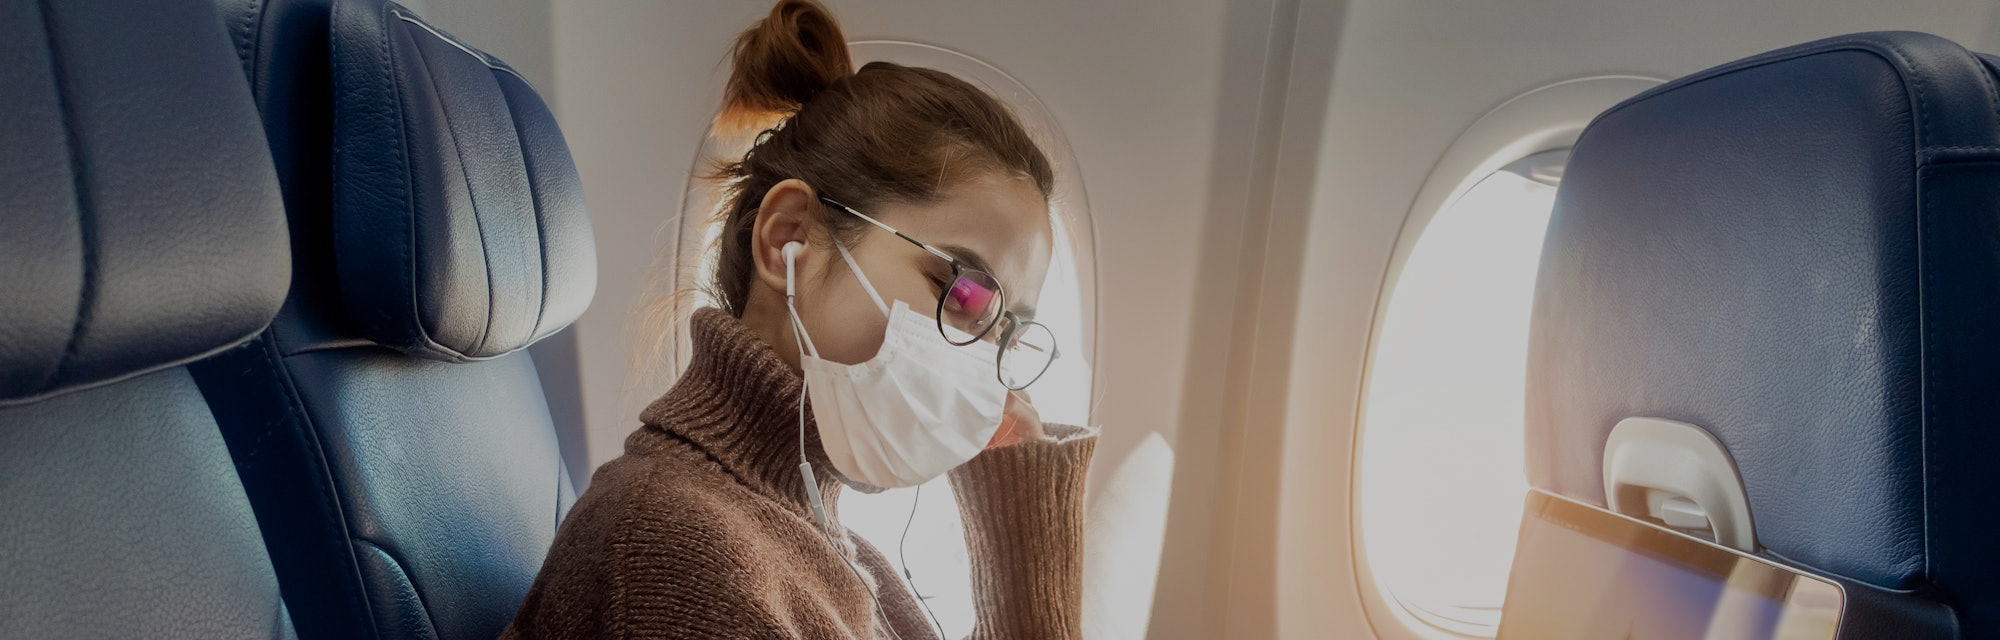 A young woman wearing face mask is traveling on airplane , New normal travel after covid-19 pandemic...